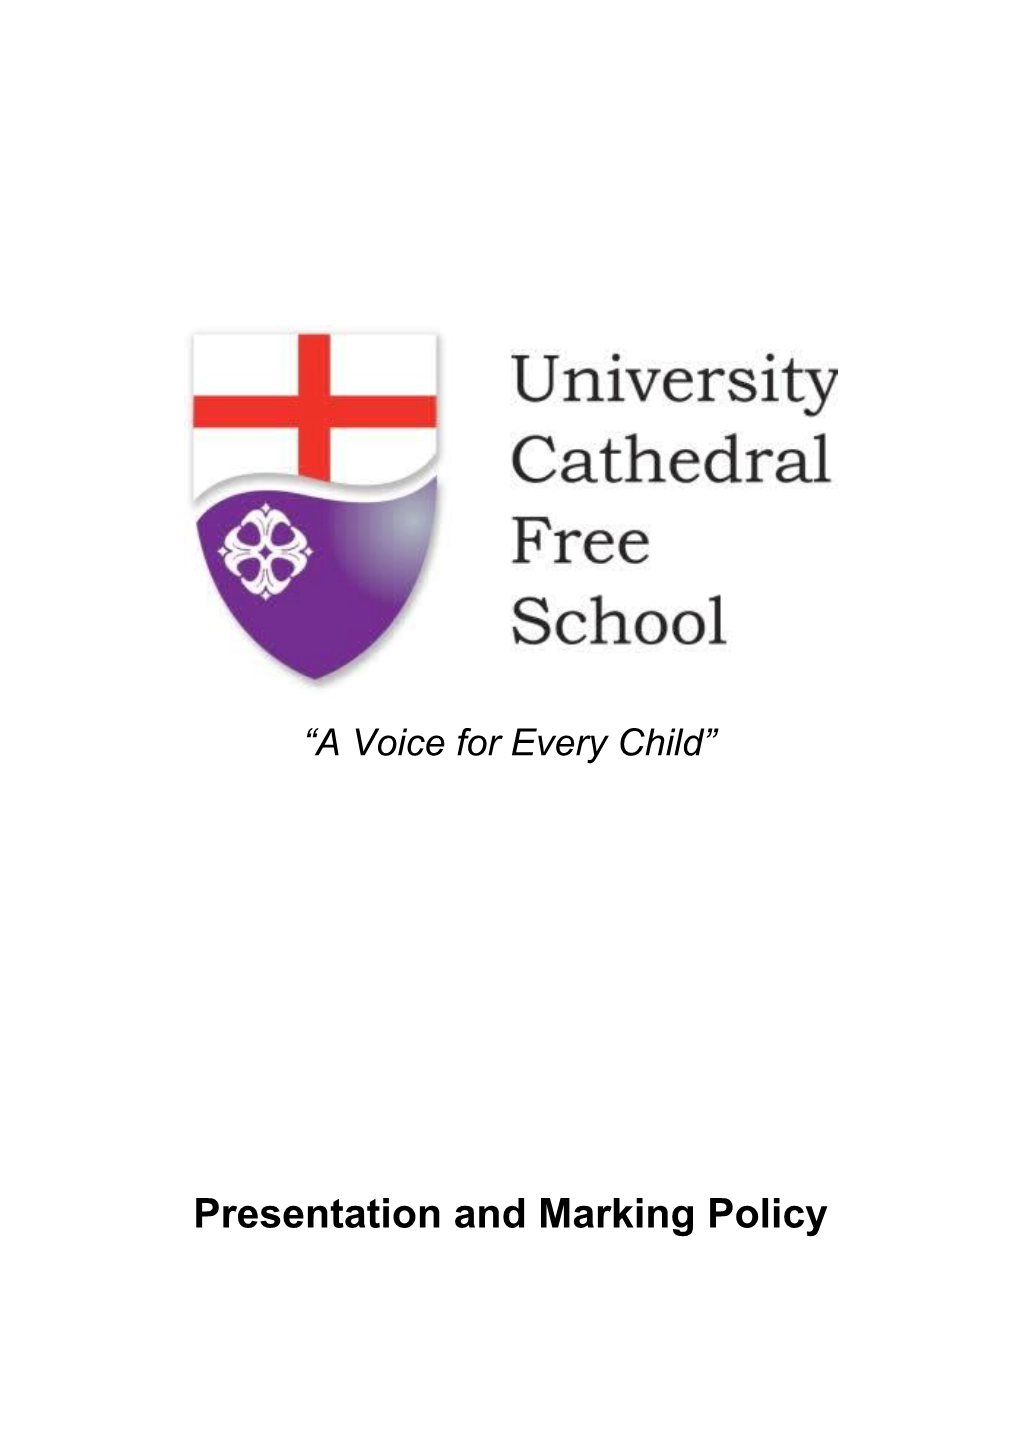 Presentation and Marking Policy